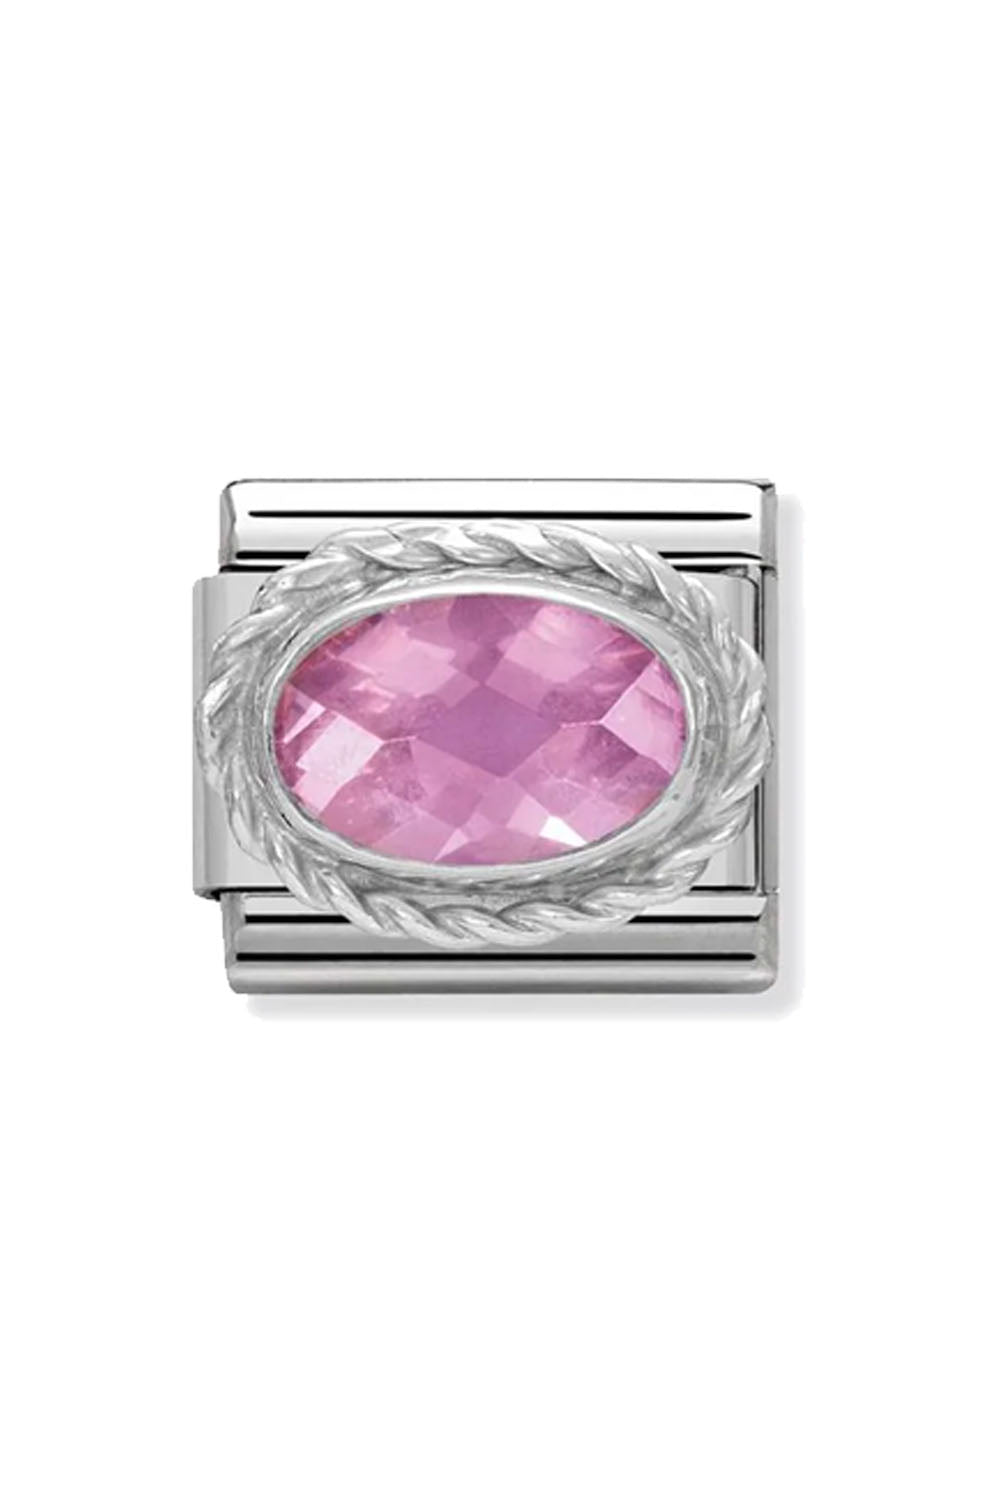 CZ faceted with 925 sterling silver setting and CZ Pink